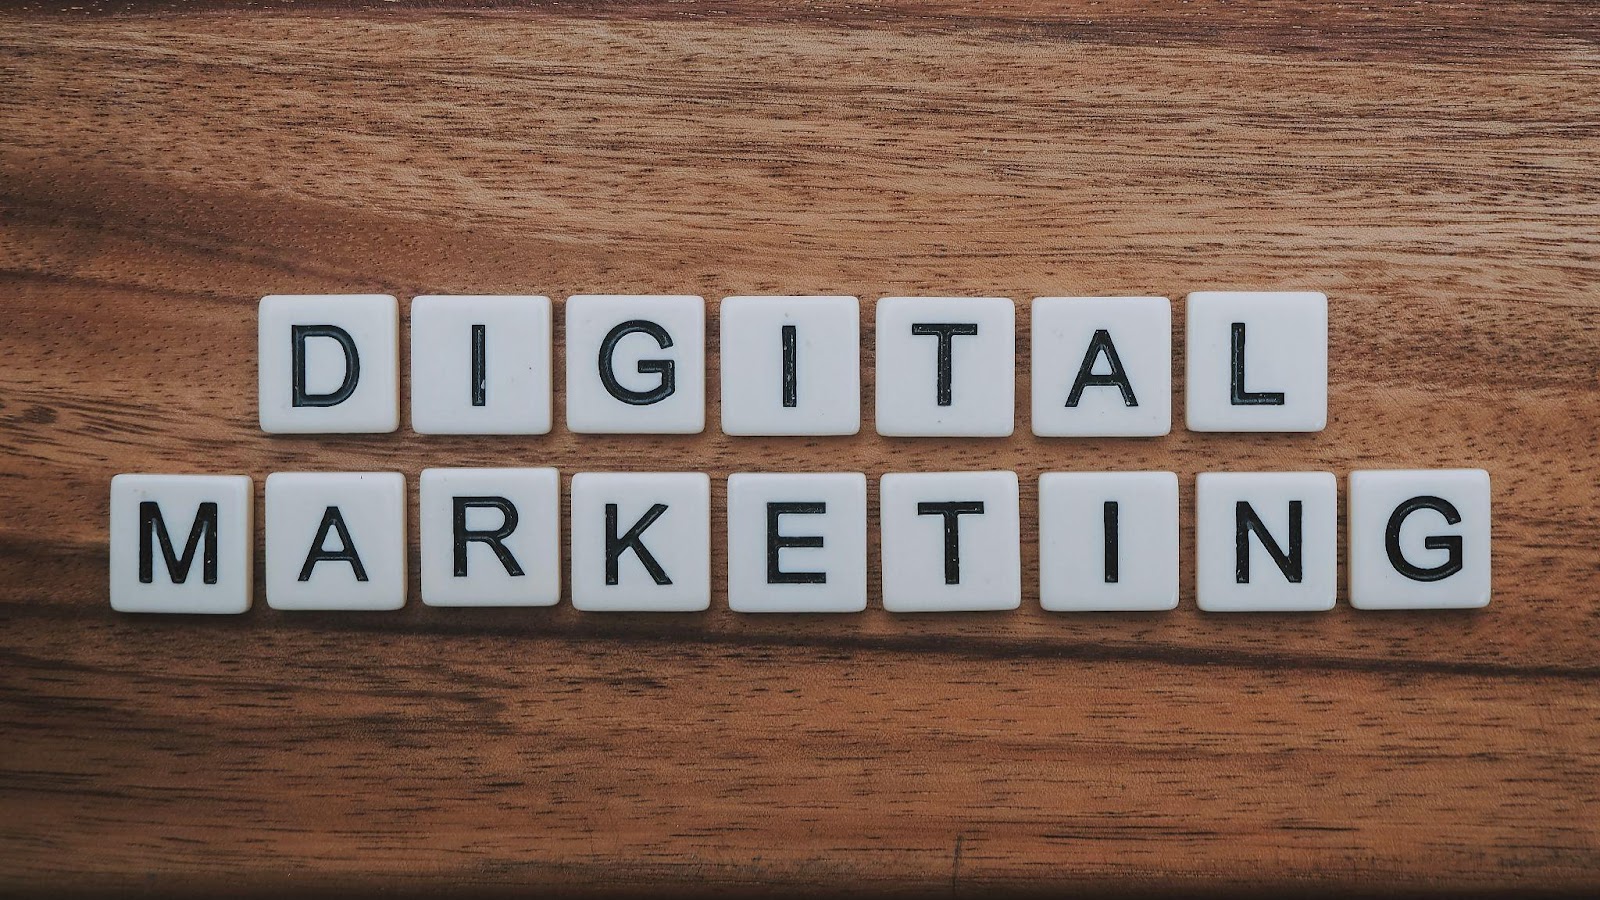 the words digital marketing spelled with tile pieces